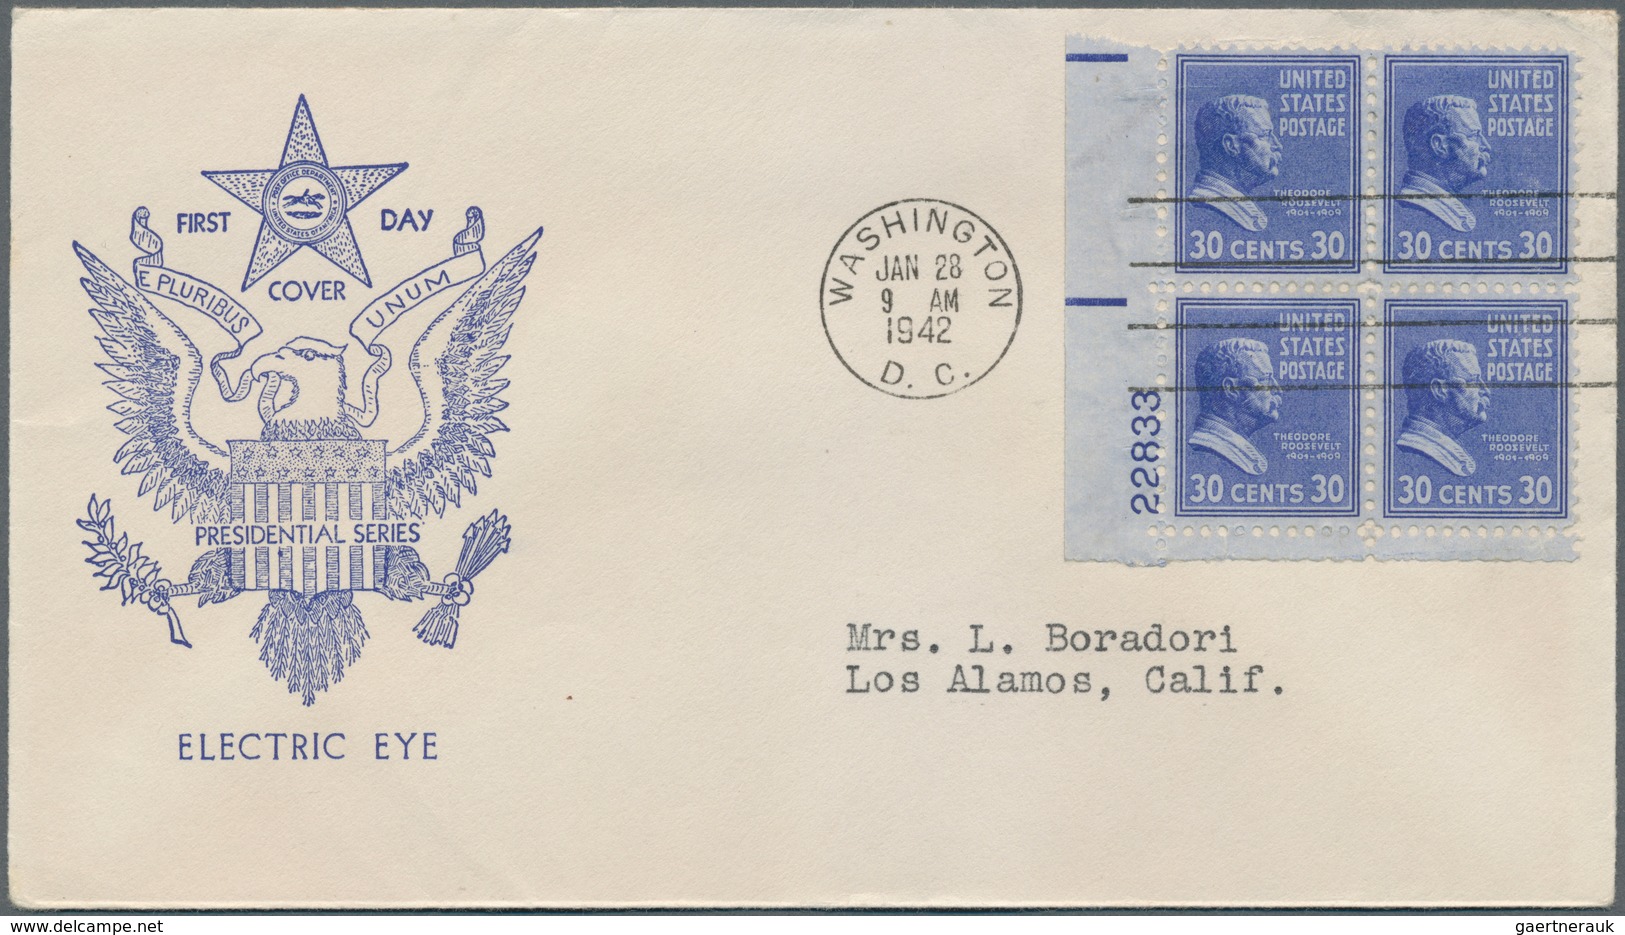 24406 Vereinigte Staaten von Amerika: 1941/1942: 116 good FDC, many Plate Blocks, all FDC are with Borders